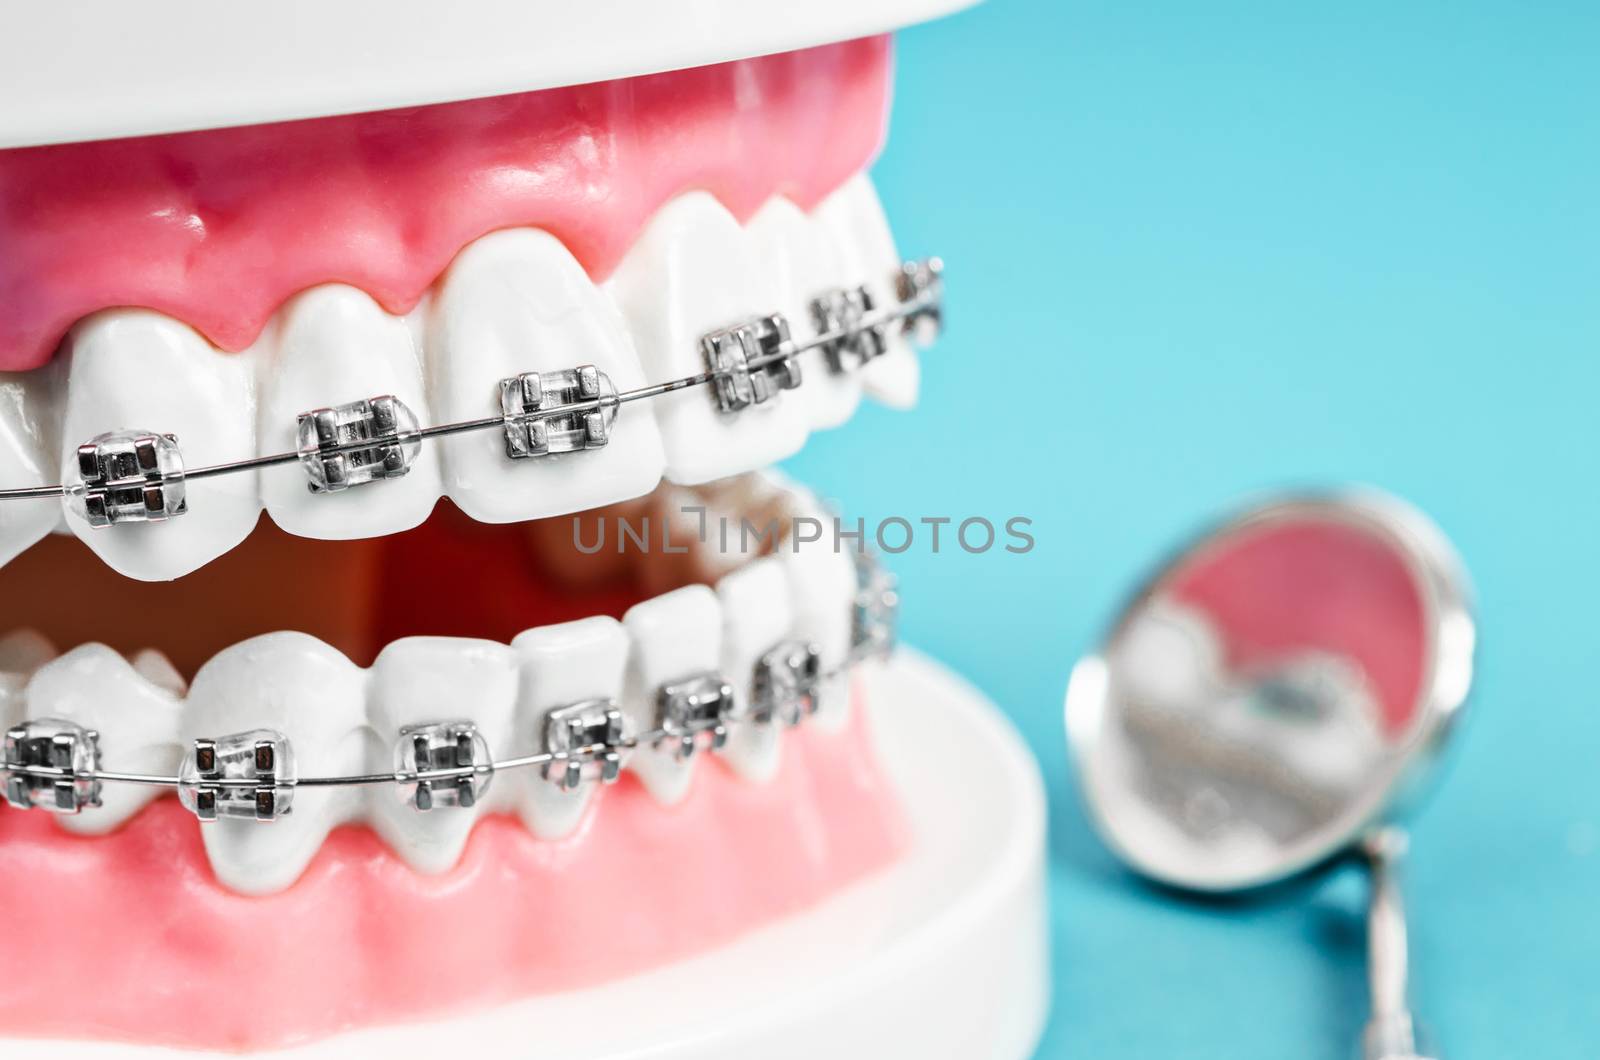 Close up tooth model with metal wire dental braces and mirror dental equipment on blue background.